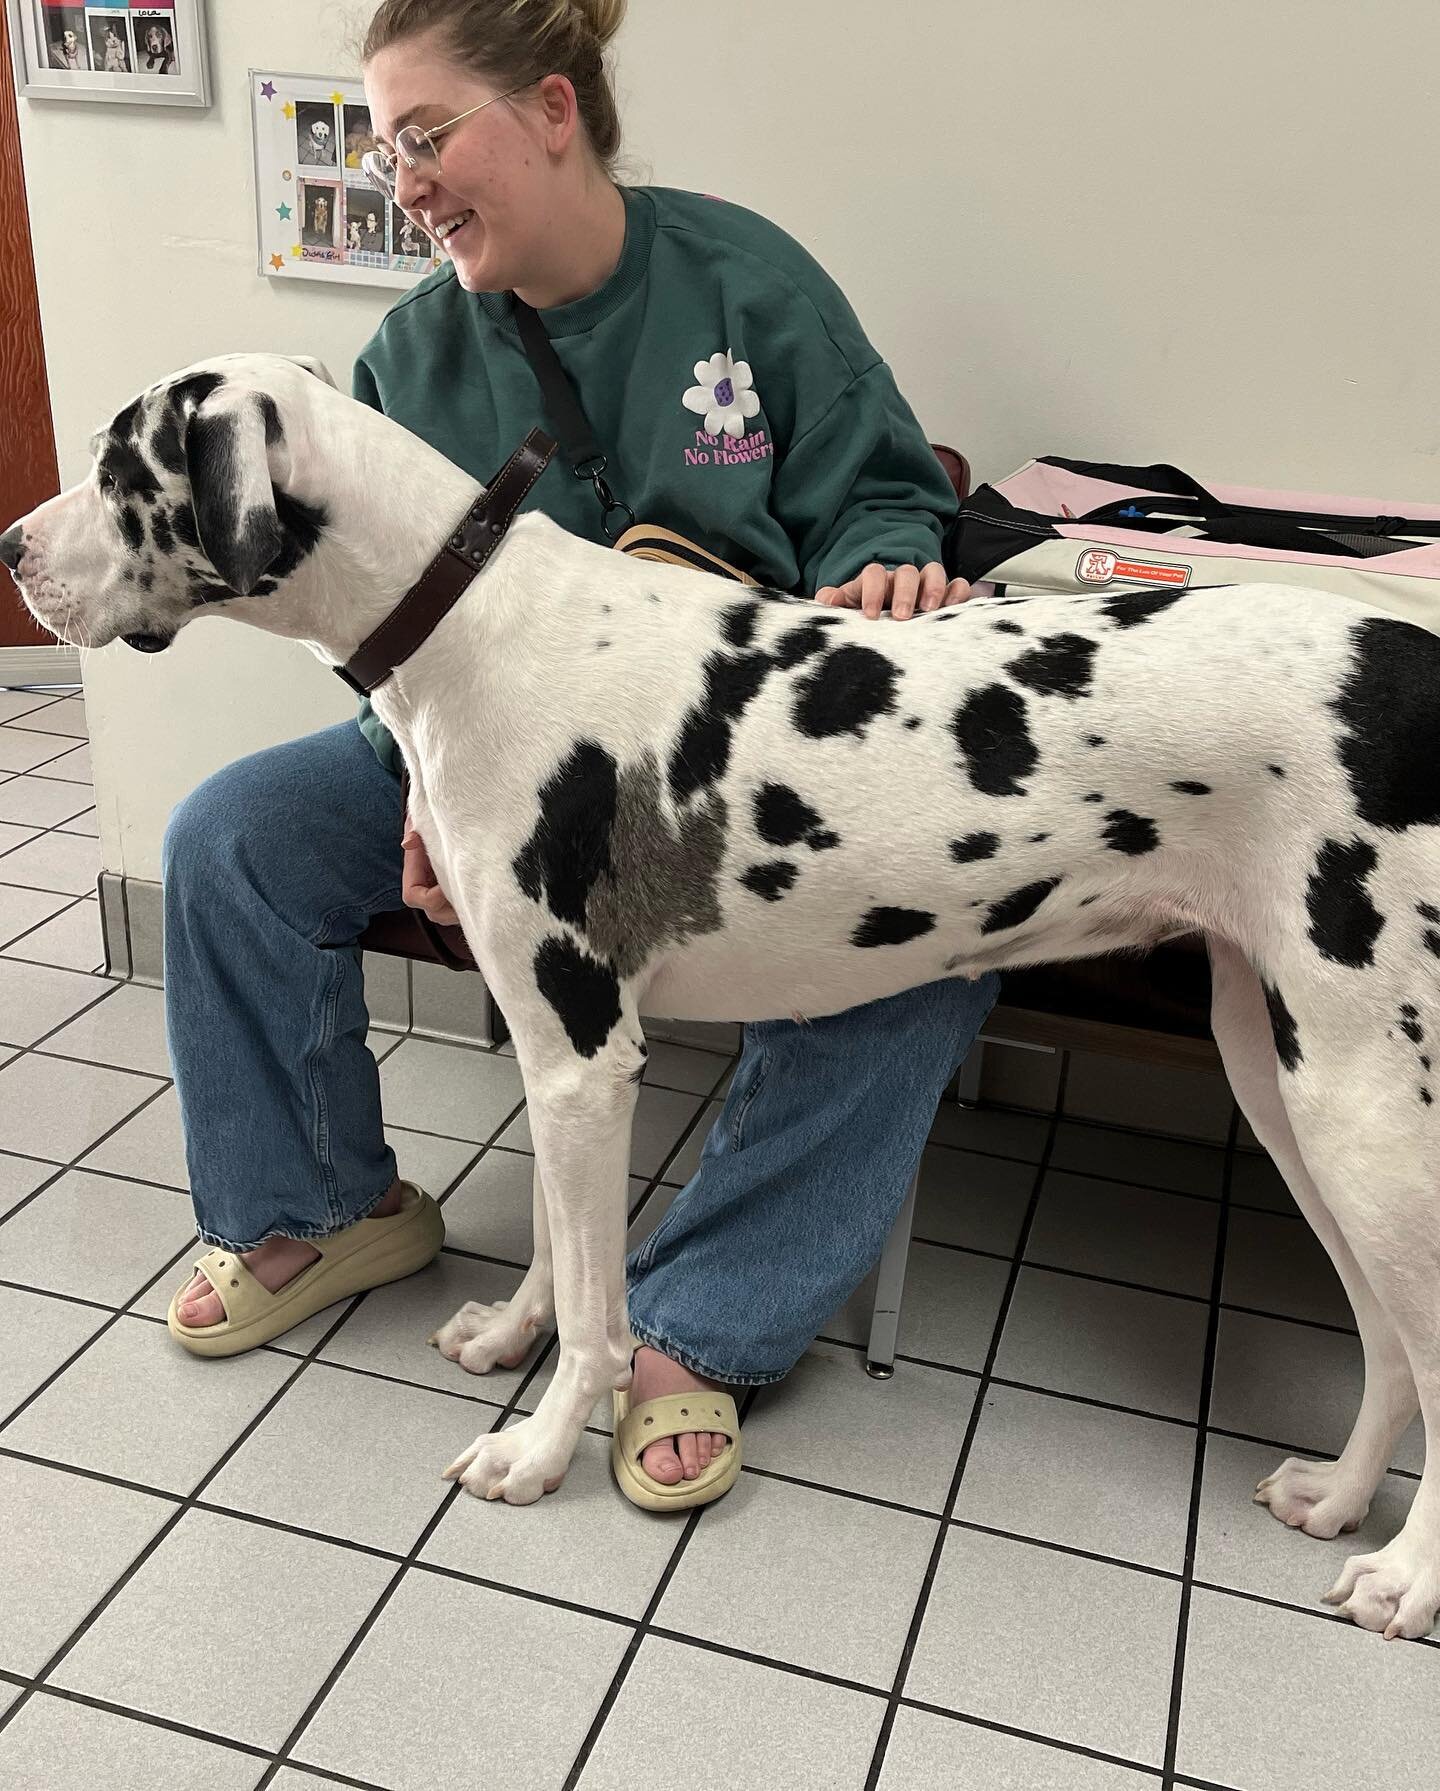 Beautiful Mercy came in a few days ago for a check up! Swipe to see her adorable face.. she was a little nervous🐶🤍🫶🏻 @geezjess